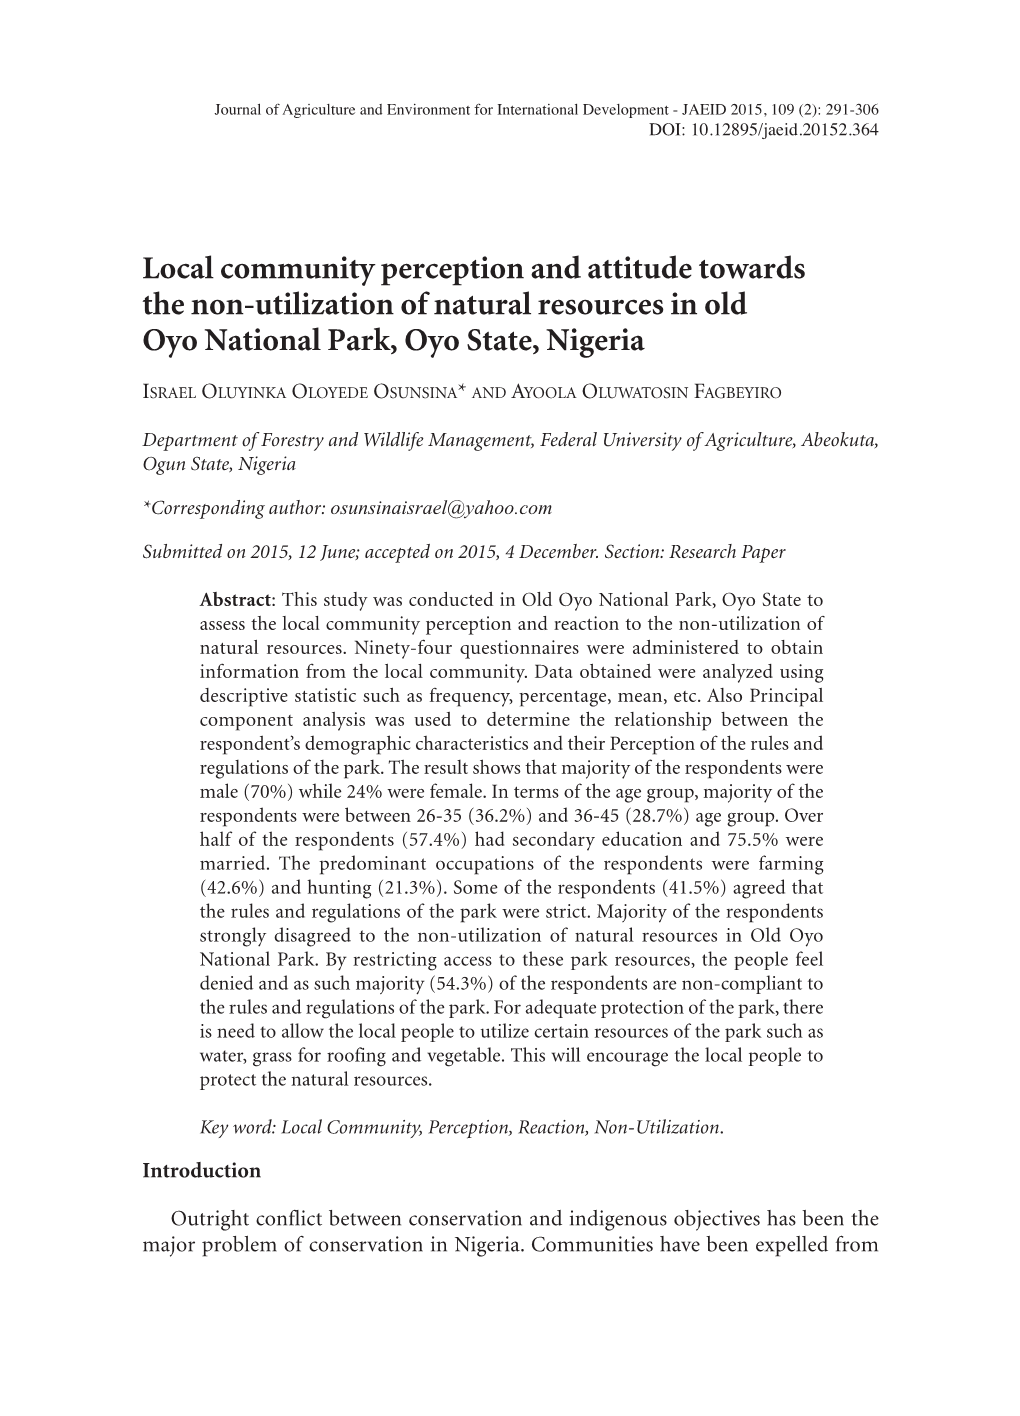 Local Community Perception and Attitude Towards the Non-Utilization of Natural Resources in Old Oyo National Park, Oyo State, Nigeria